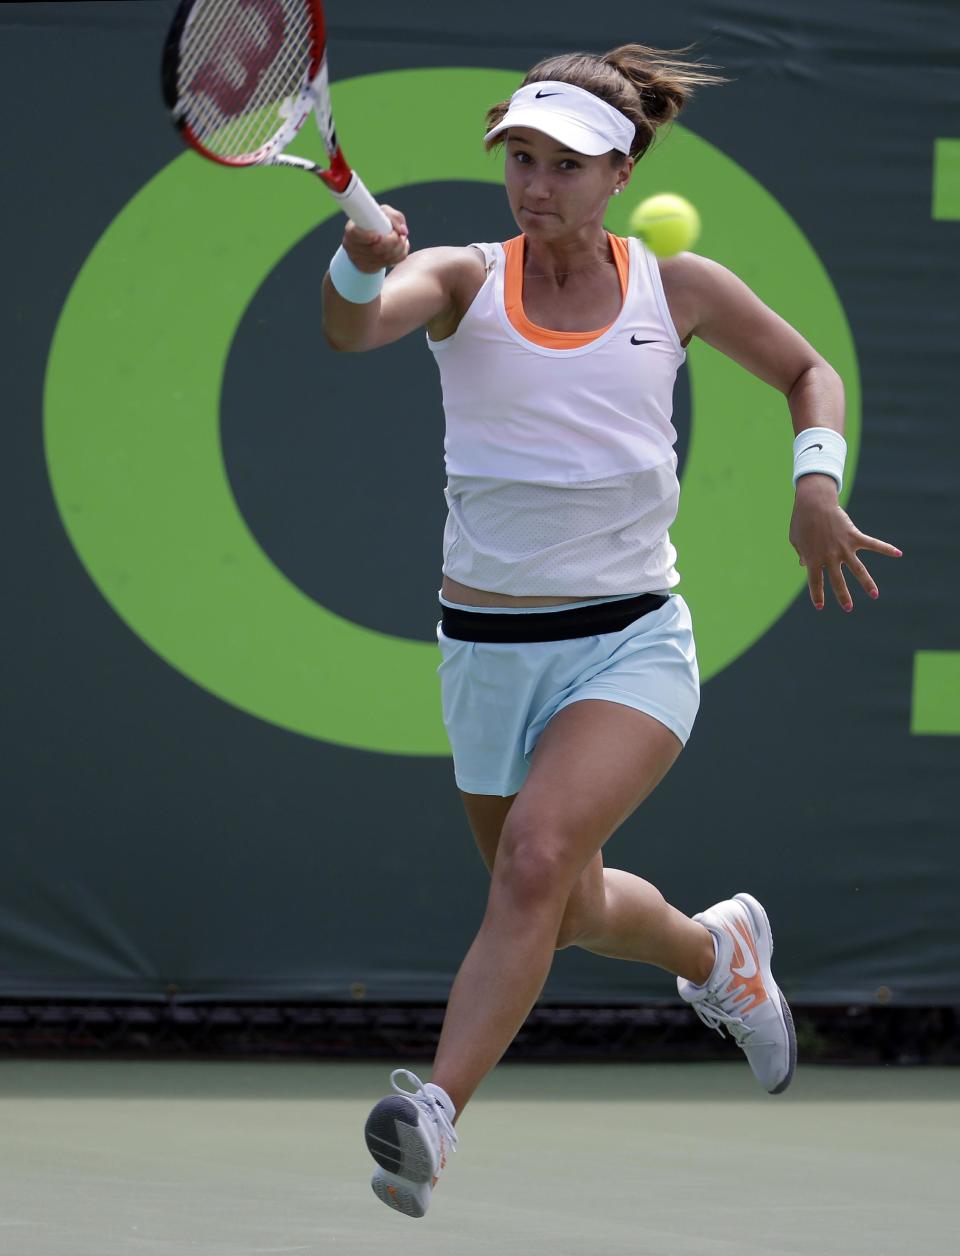 Lauren Davis, of the United States, returns the ball to Ana Ivanovic, of Serbia, during a match at the Sony Open tennis tournament, Thursday, March 20, 2014, in Key Biscayne, Fla. AP Photo/Lynne Sladky)